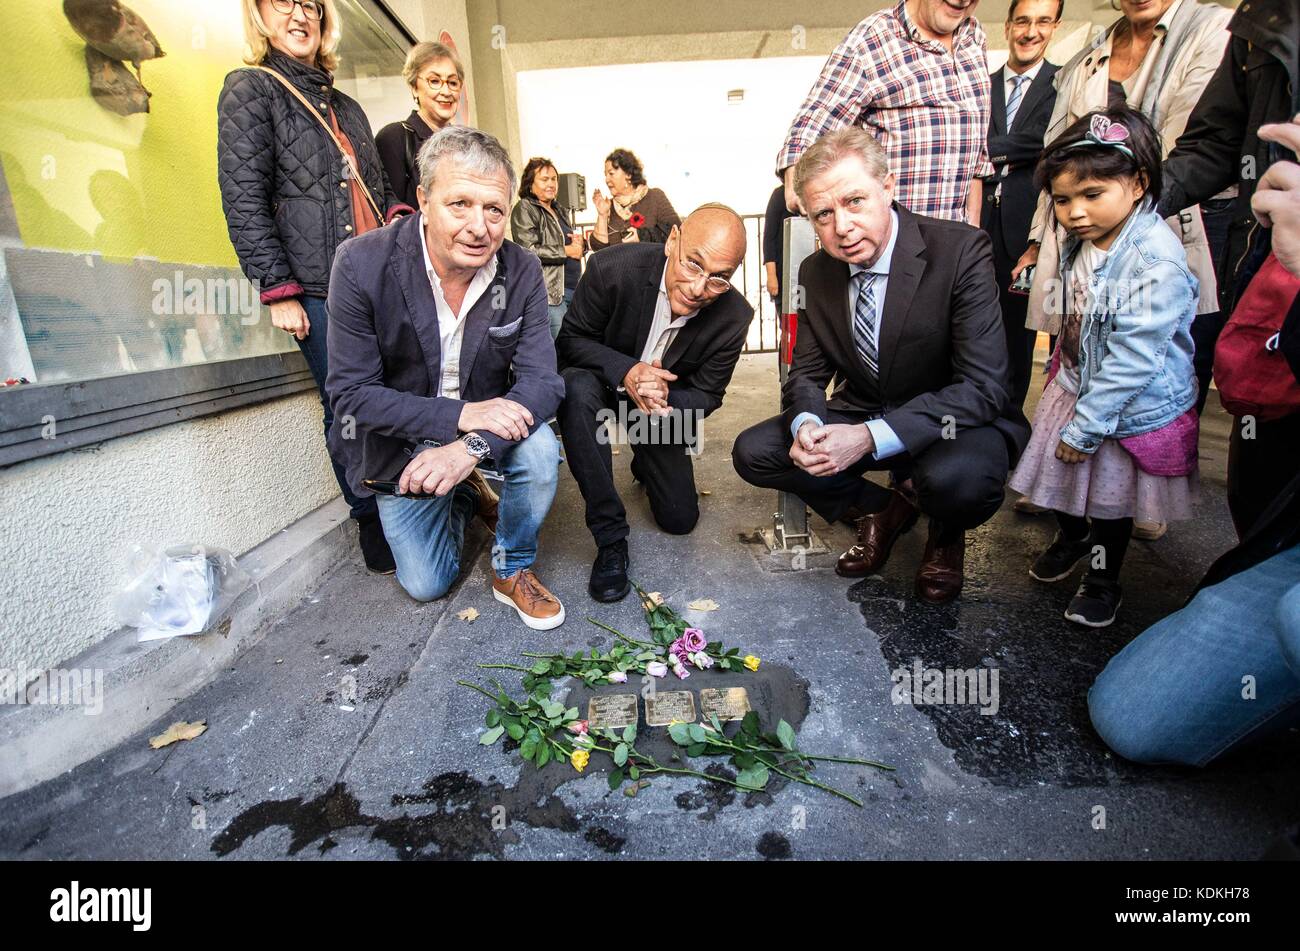 Munich, Bavaria, Germany. 14th Oct, 2017. Terry Swartzberg. Despite lengthy battles, the so-called Stolpersteine ('Stumbling Blocks'') containing the names & information of victims of National Socialism were installed at four different sites in Munich. The City of Munich forbid the installation of the memorial stones on public ground in 2015, which led the Stolpersteine Initiative (''˜Stumbling Block Initiative'') to seek private properties to install them. To date, 61,000 Stolpersteine in 2,000 cities in 21 countries have been dedicated, with much criticism lobbed against Munich's Stock Photo